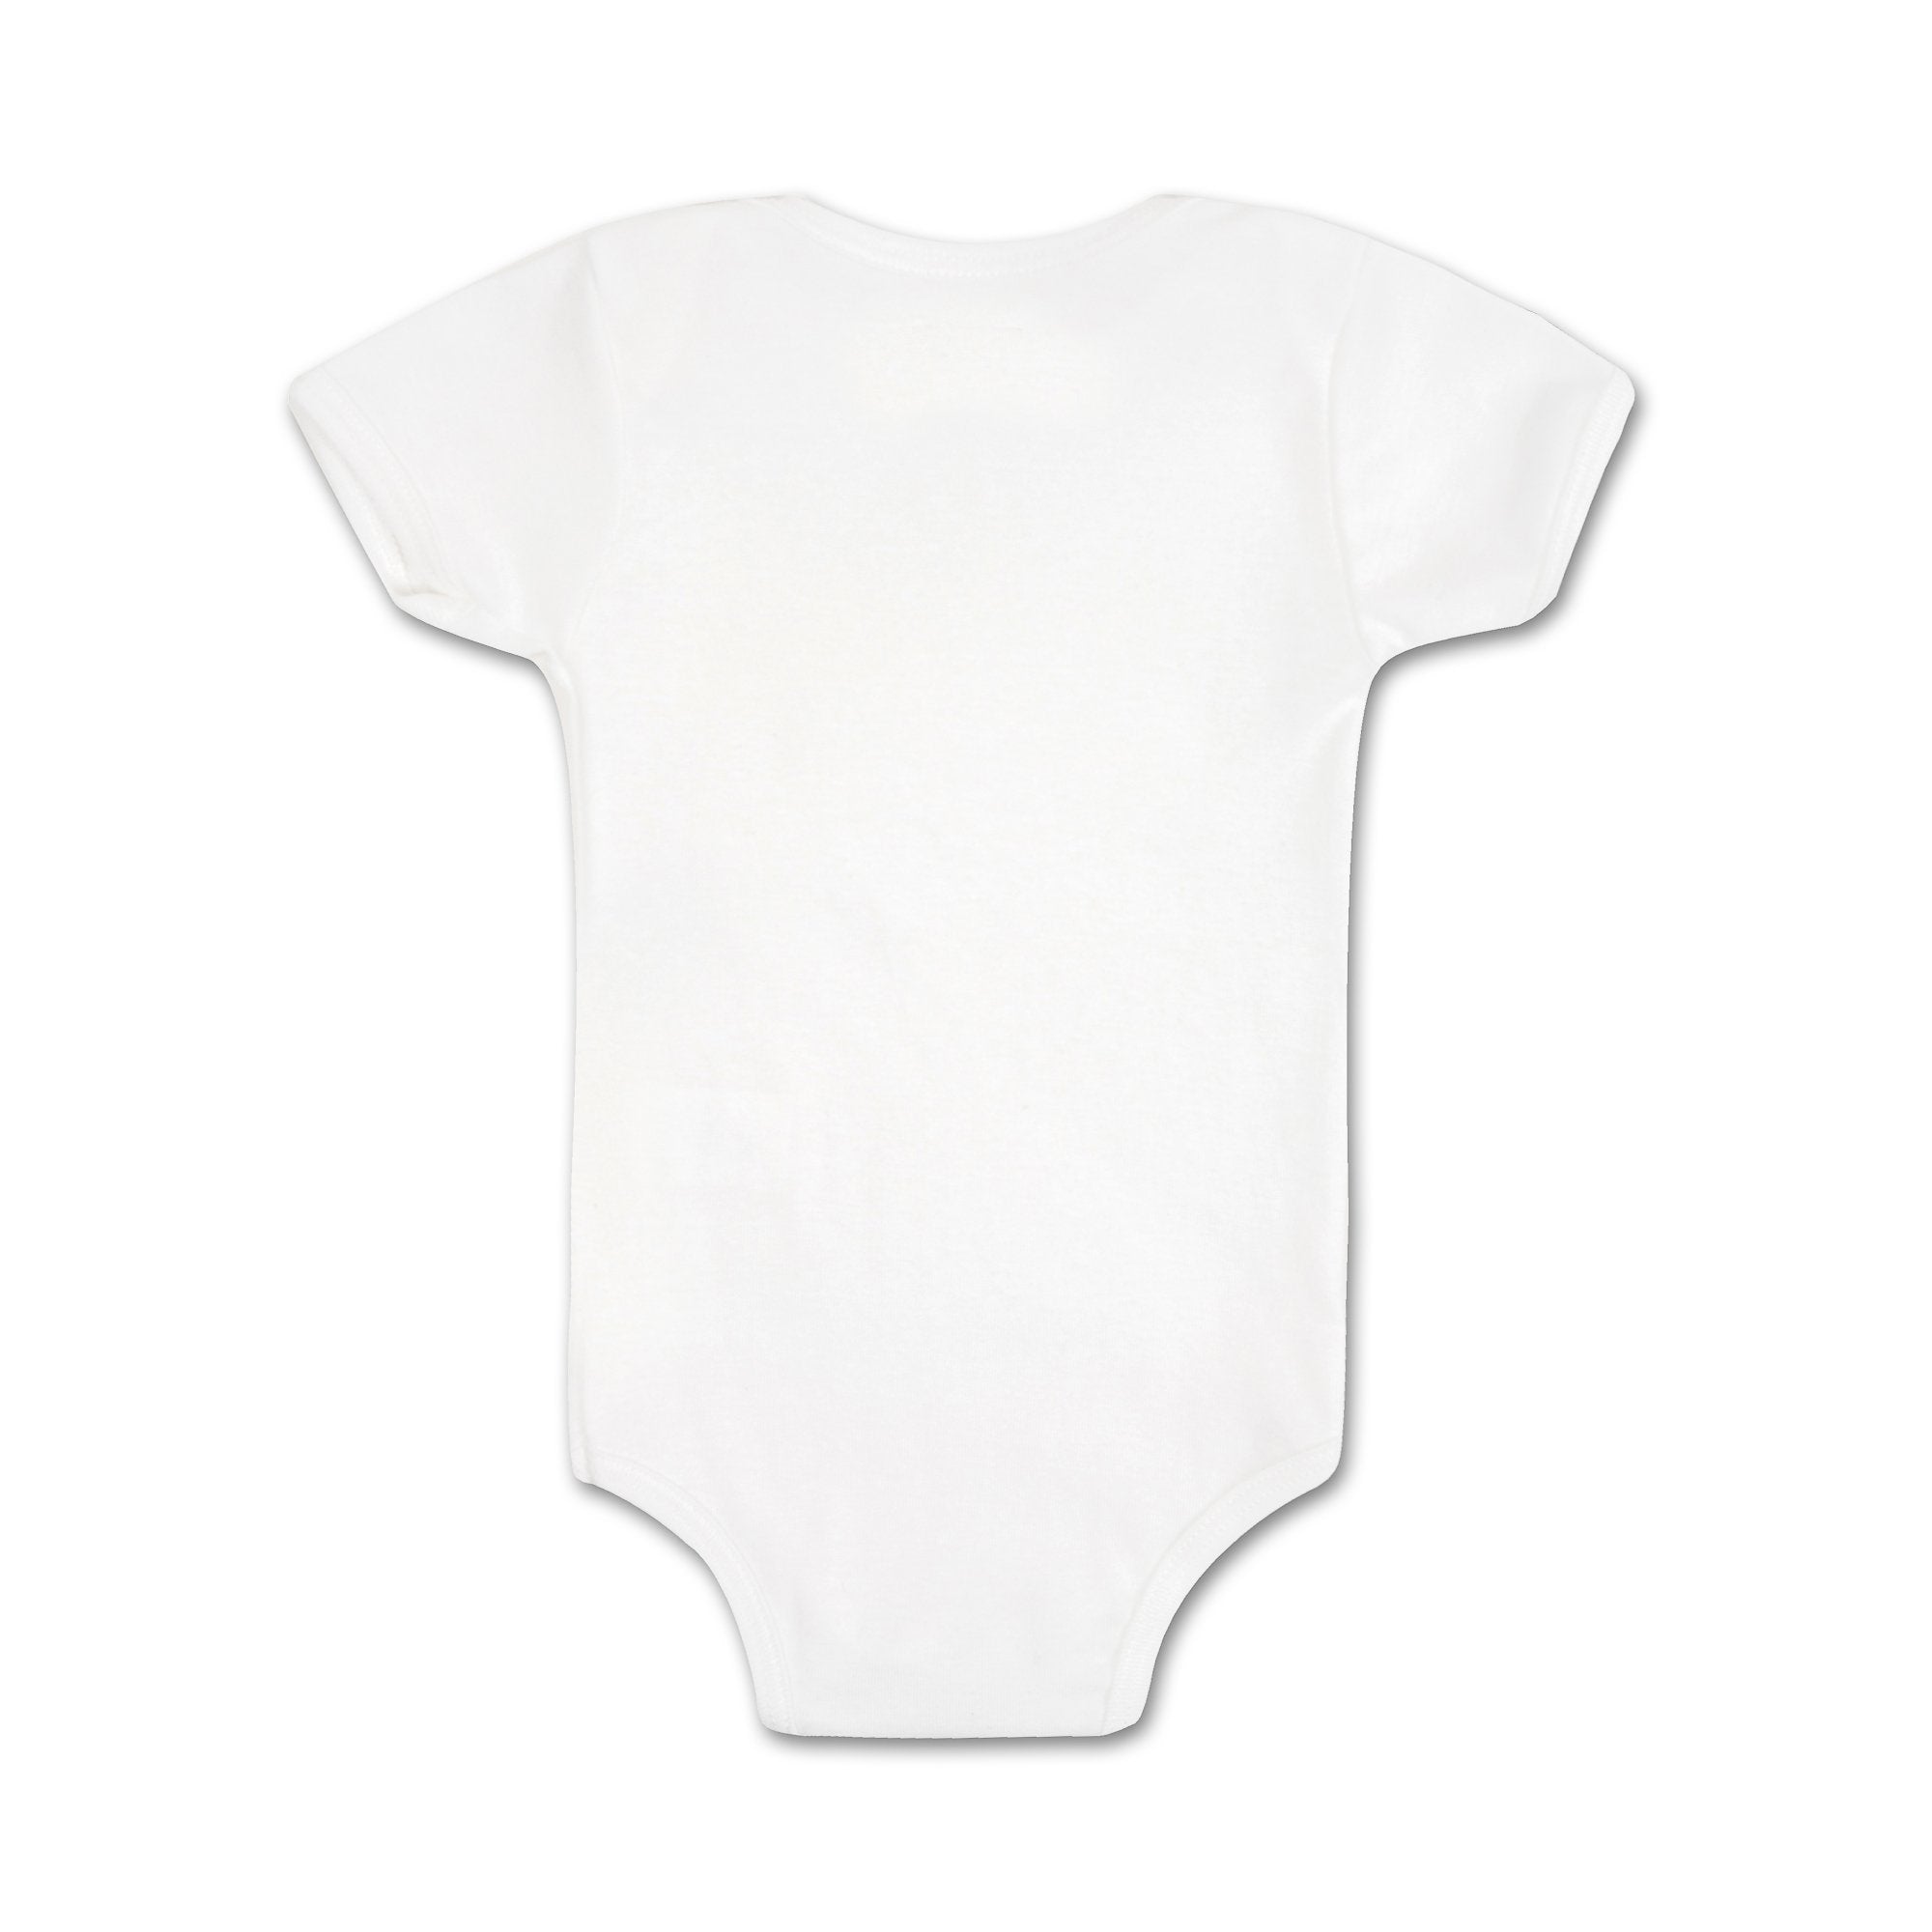 Curated For The Cool Kids Onesie - Haus of JR